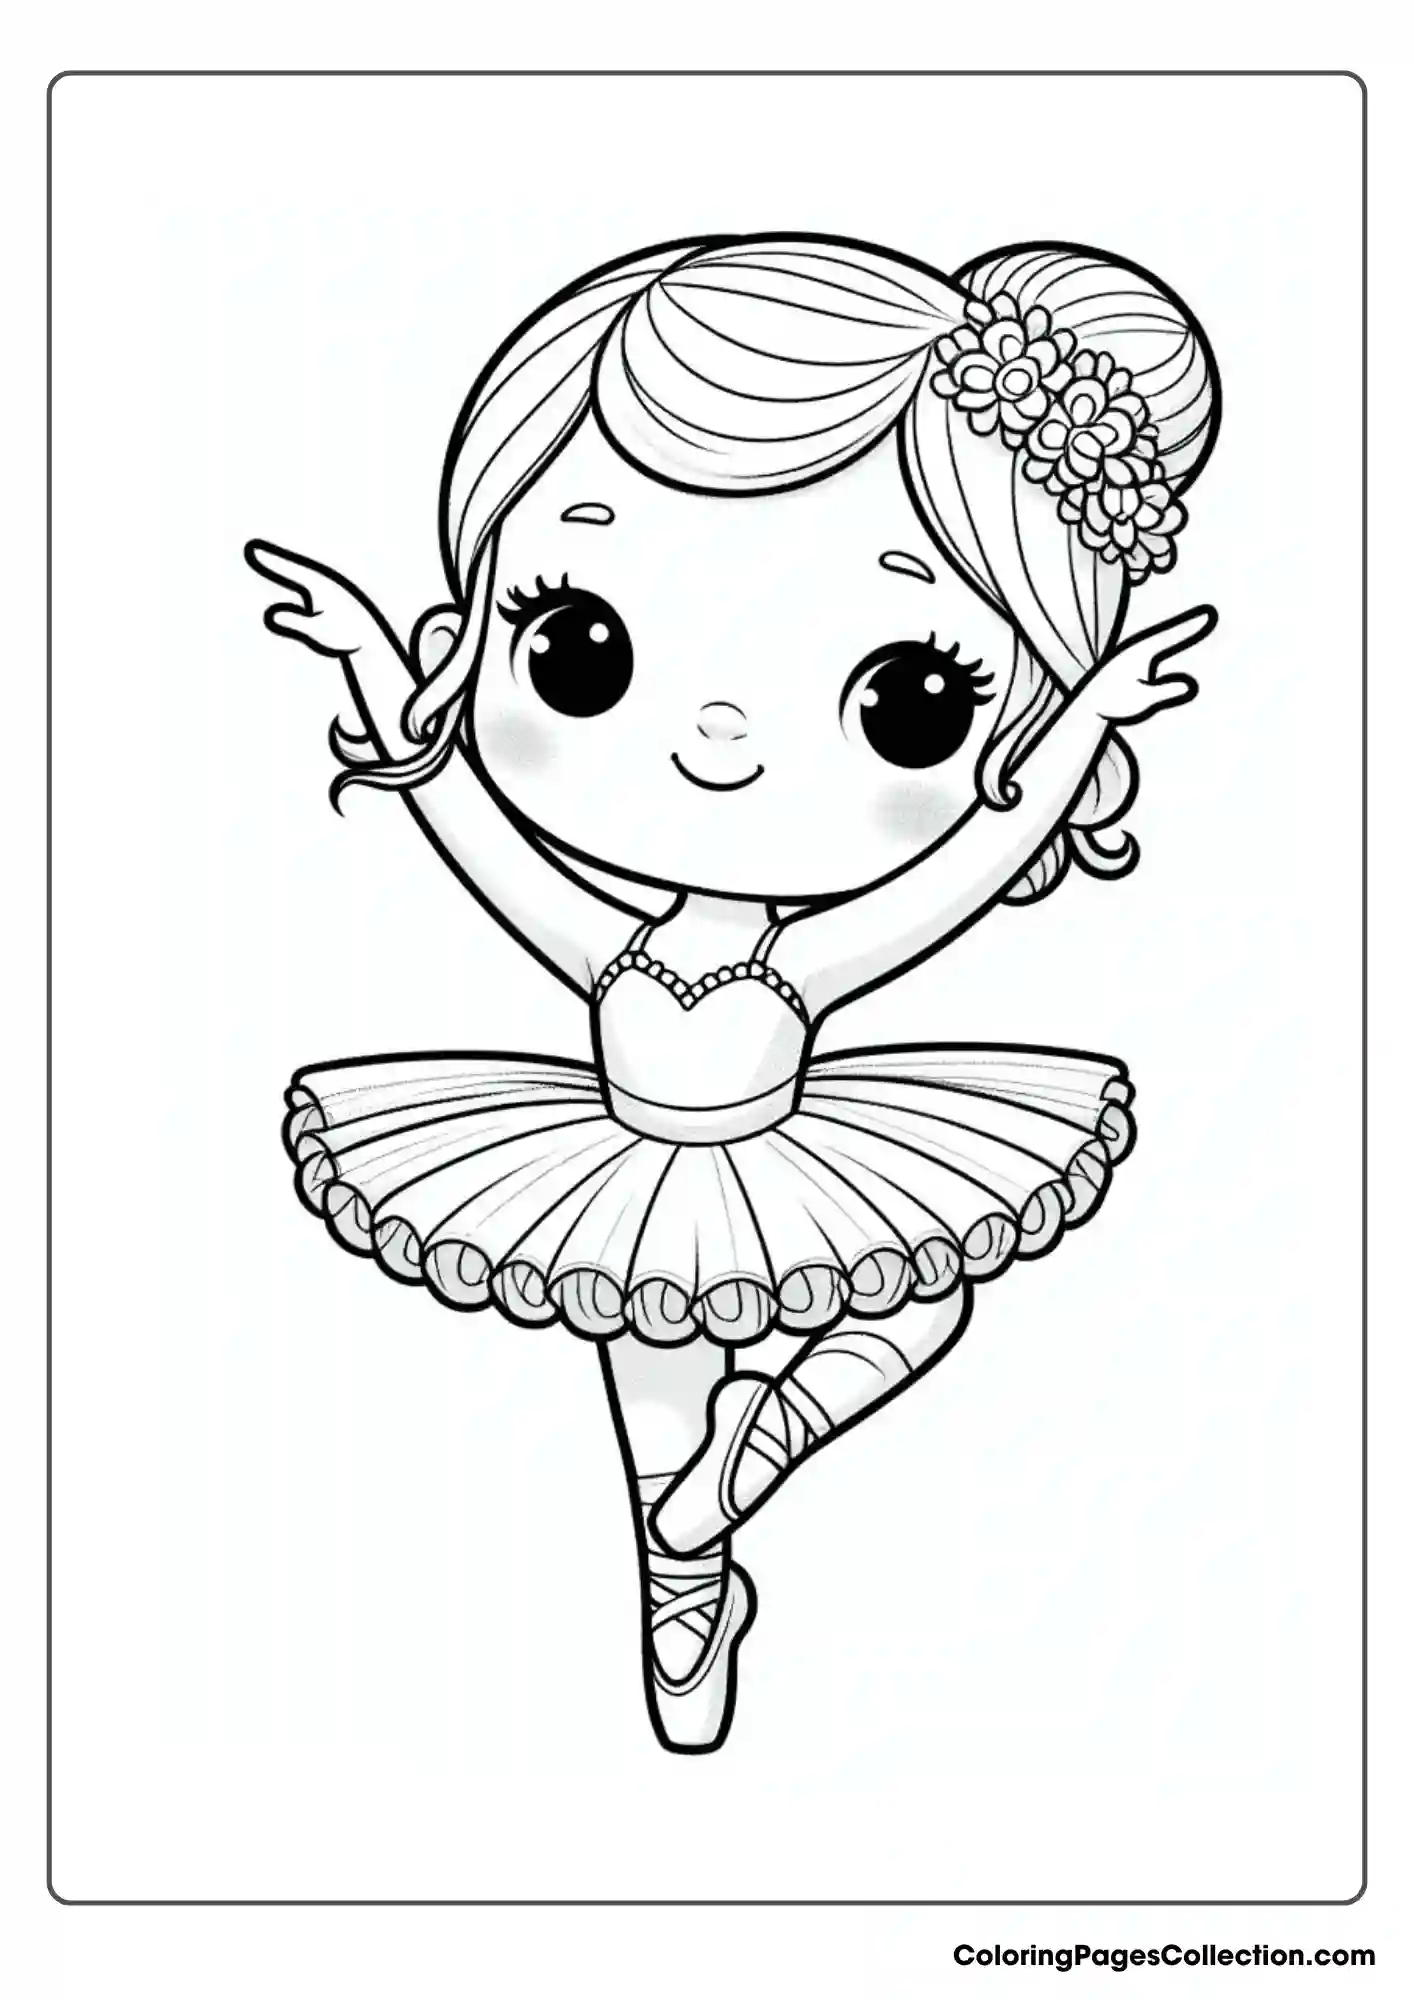 Cute Ballerina Coloring Pages For Kids